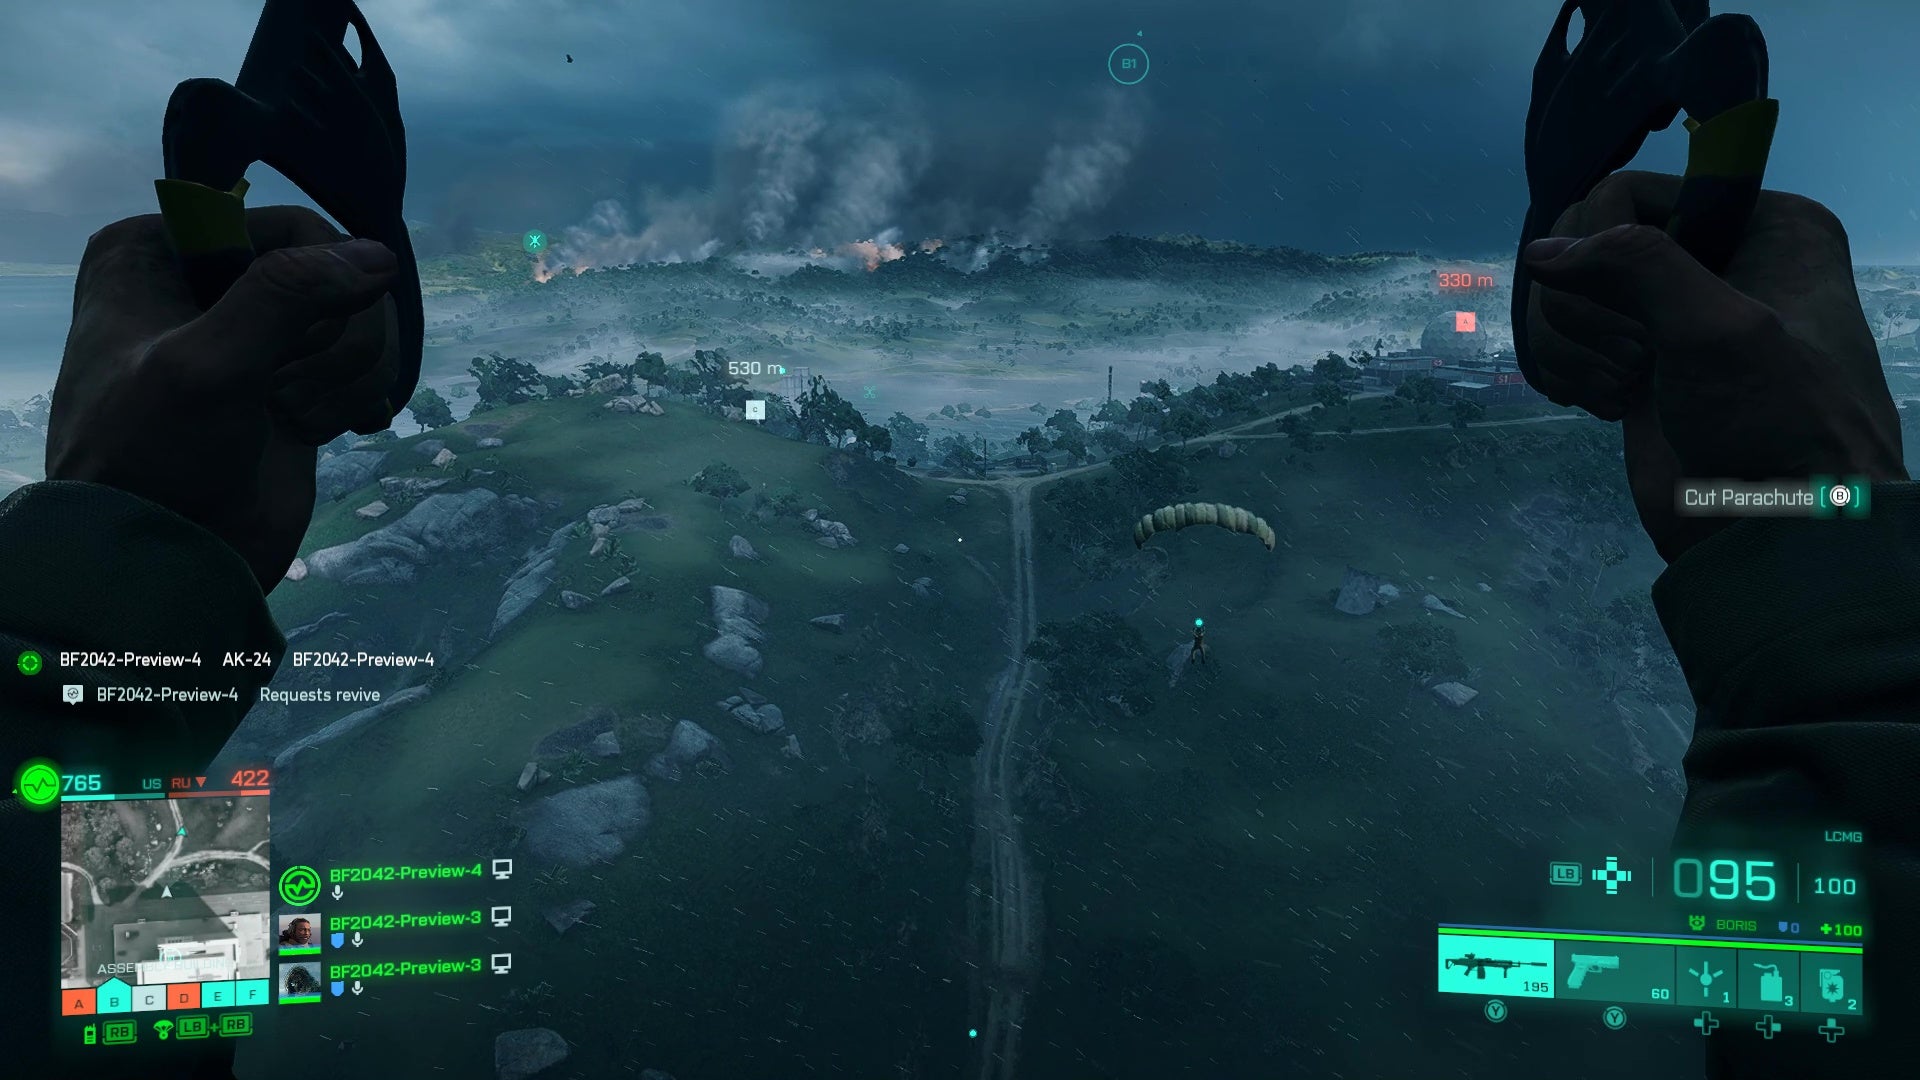 A player parachutes into woodland during a storm in Battlefield 2042.